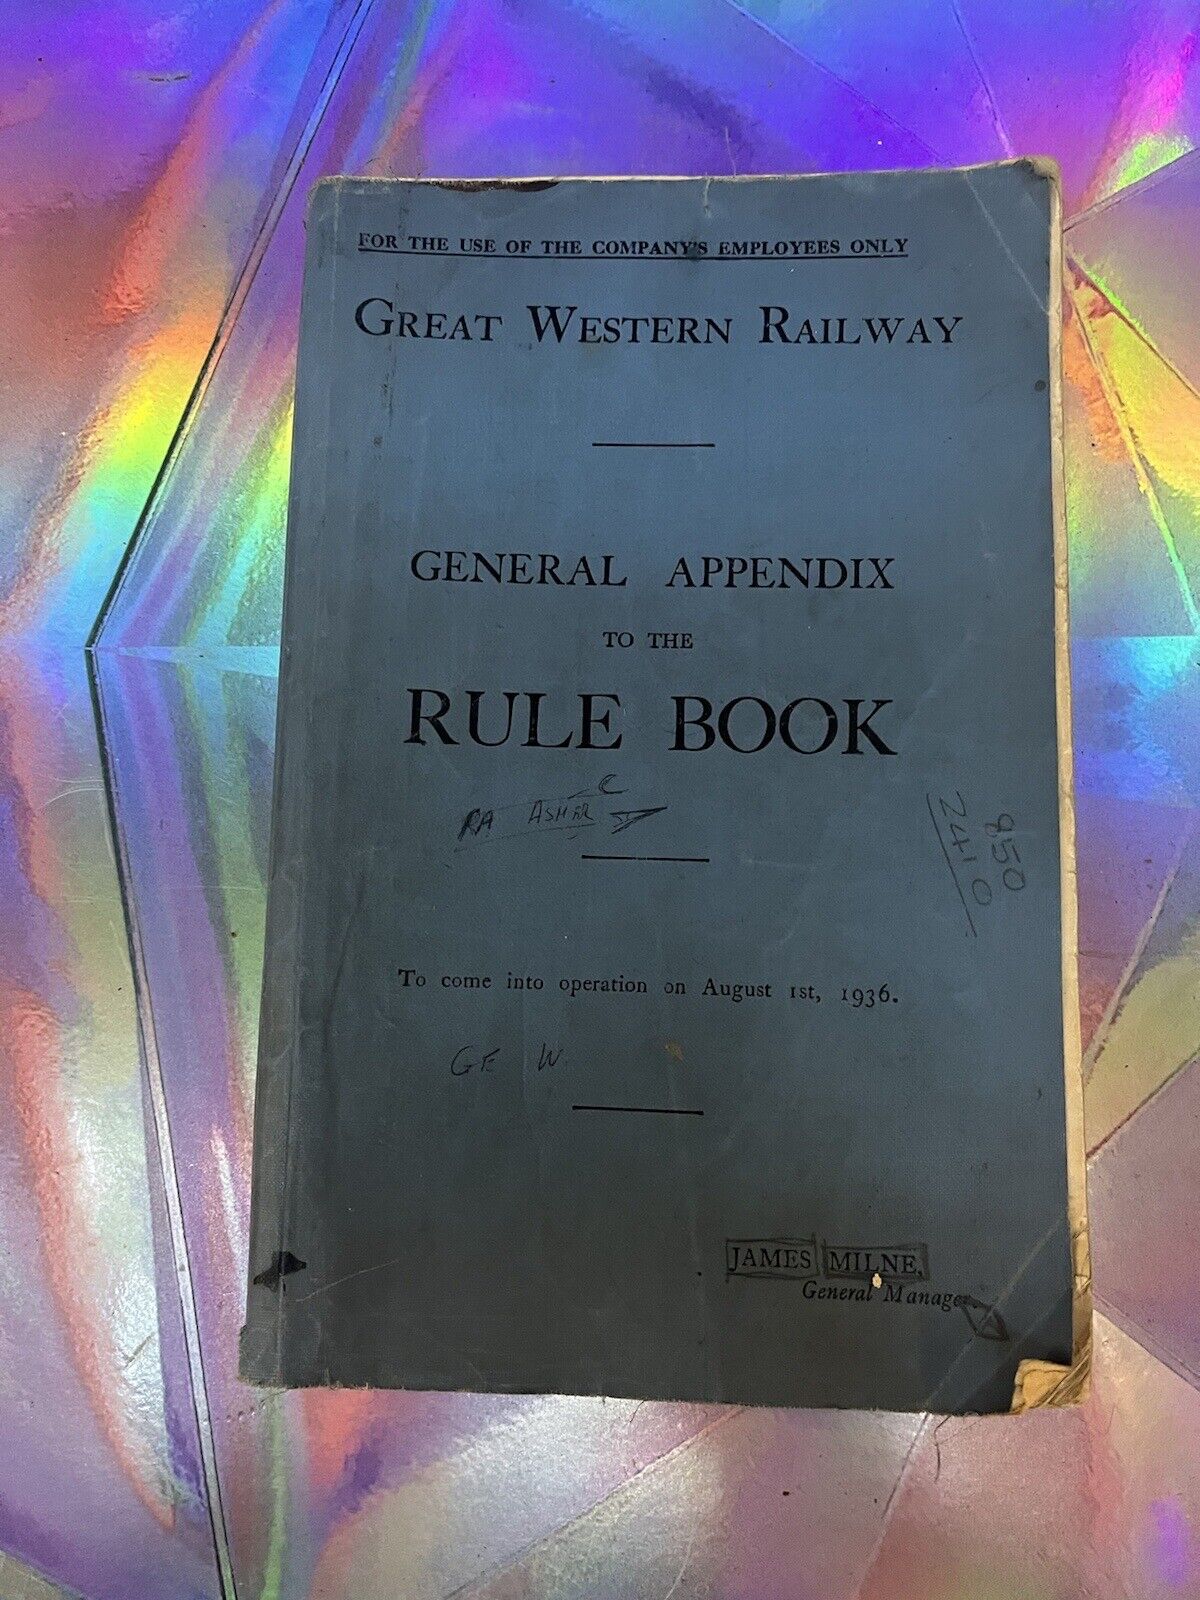 GWR (Railway) General Appendix To The Rule Book. August 1936.